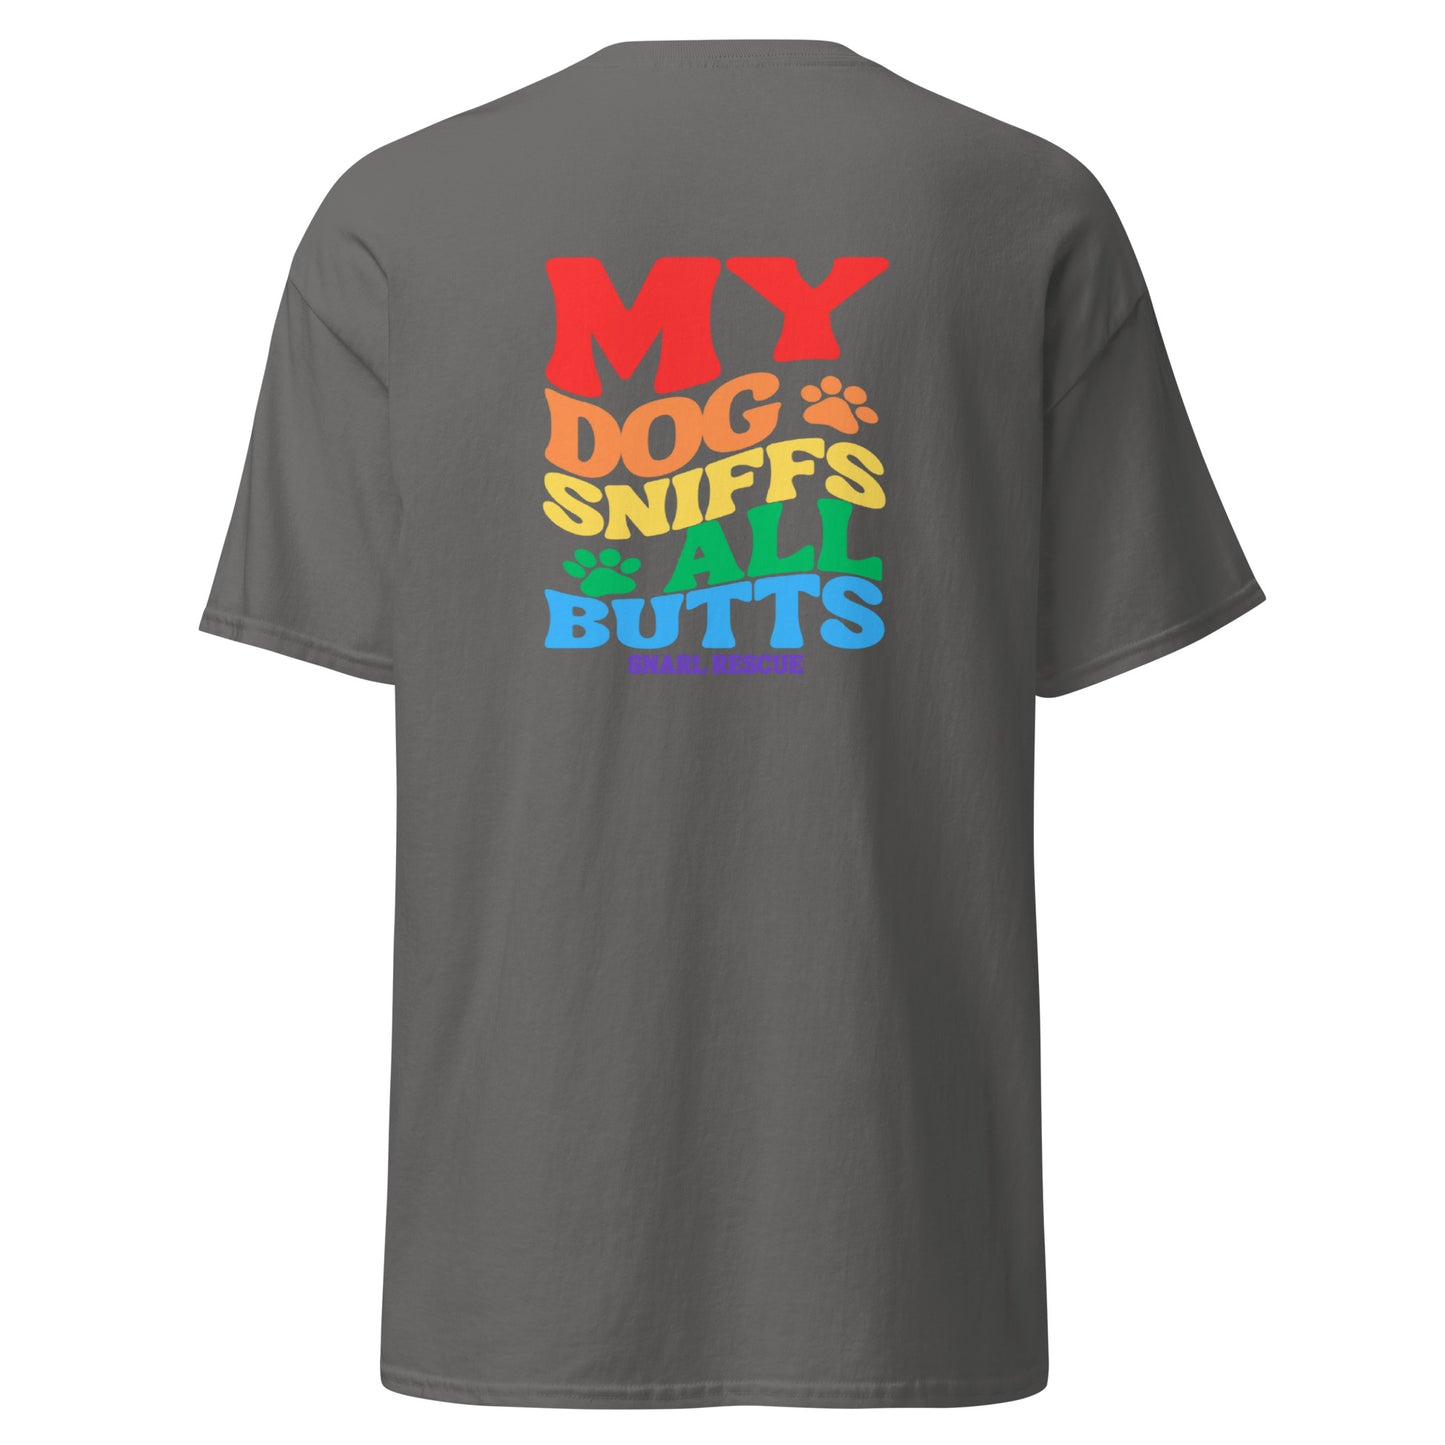 The My Dog Sniffs All Butts Tee